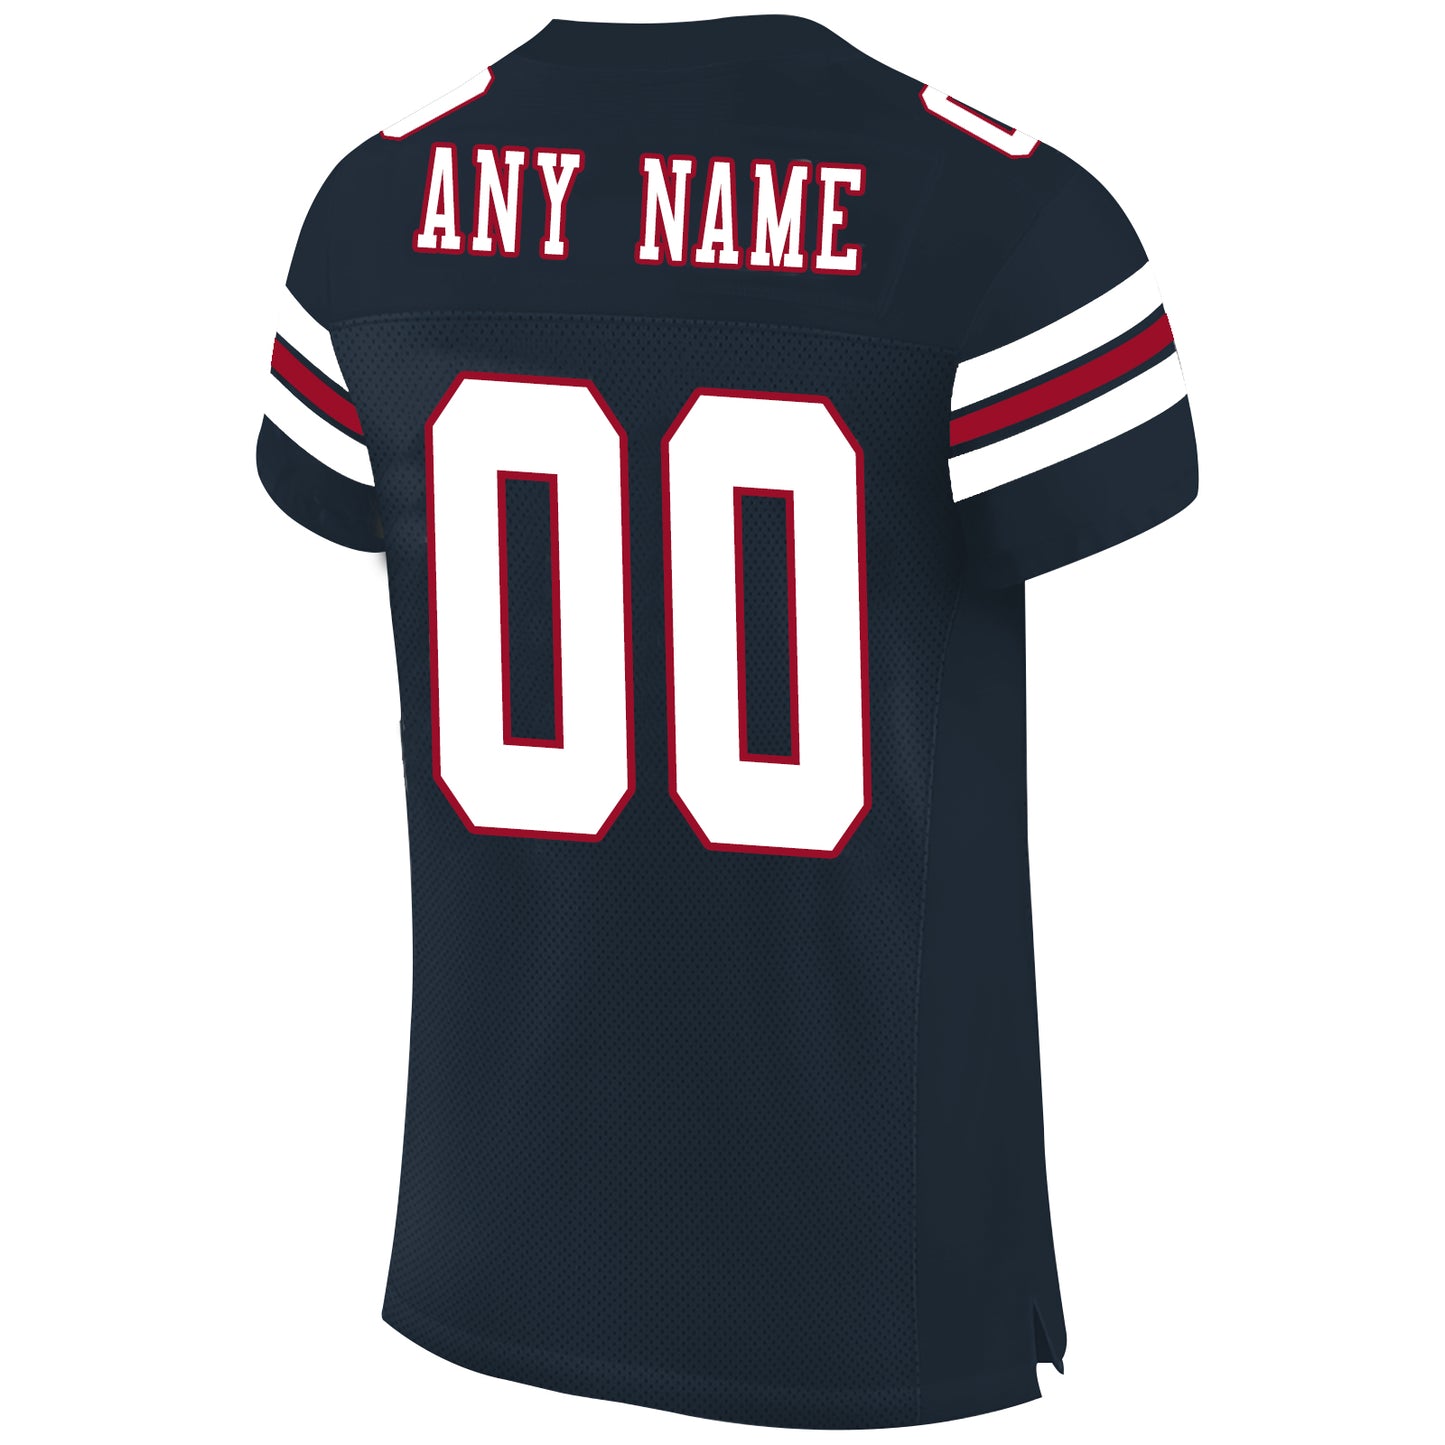 Custom Football Jersey Chicago Bears Personalize Sports Shirt Design Navy Stitched Name And Number Size S to 6XL Christmas Birthday Gift